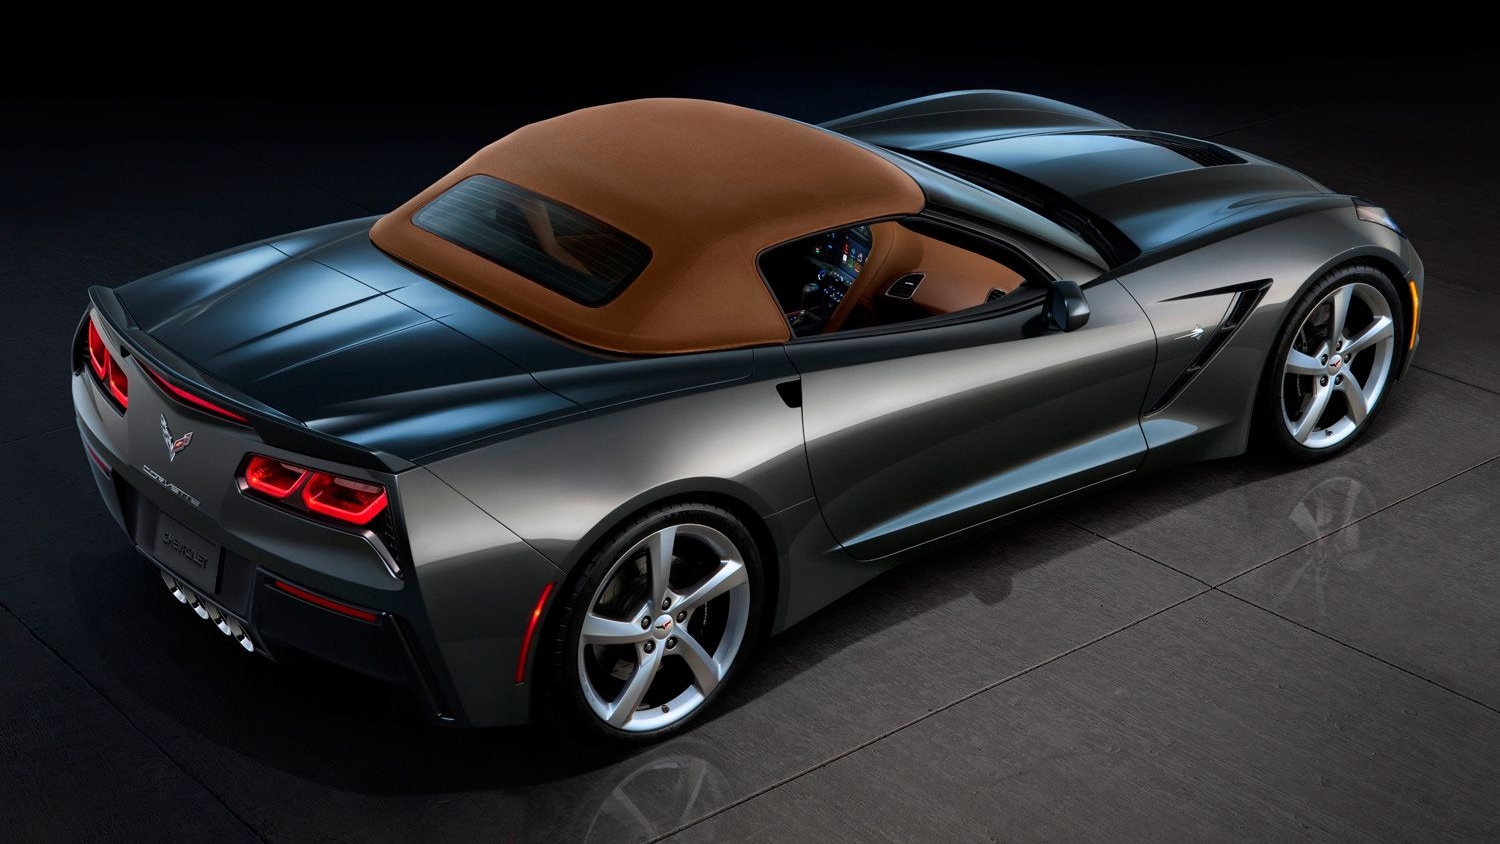 2014 Chevrolet Covette Stingray Convertible leaked images